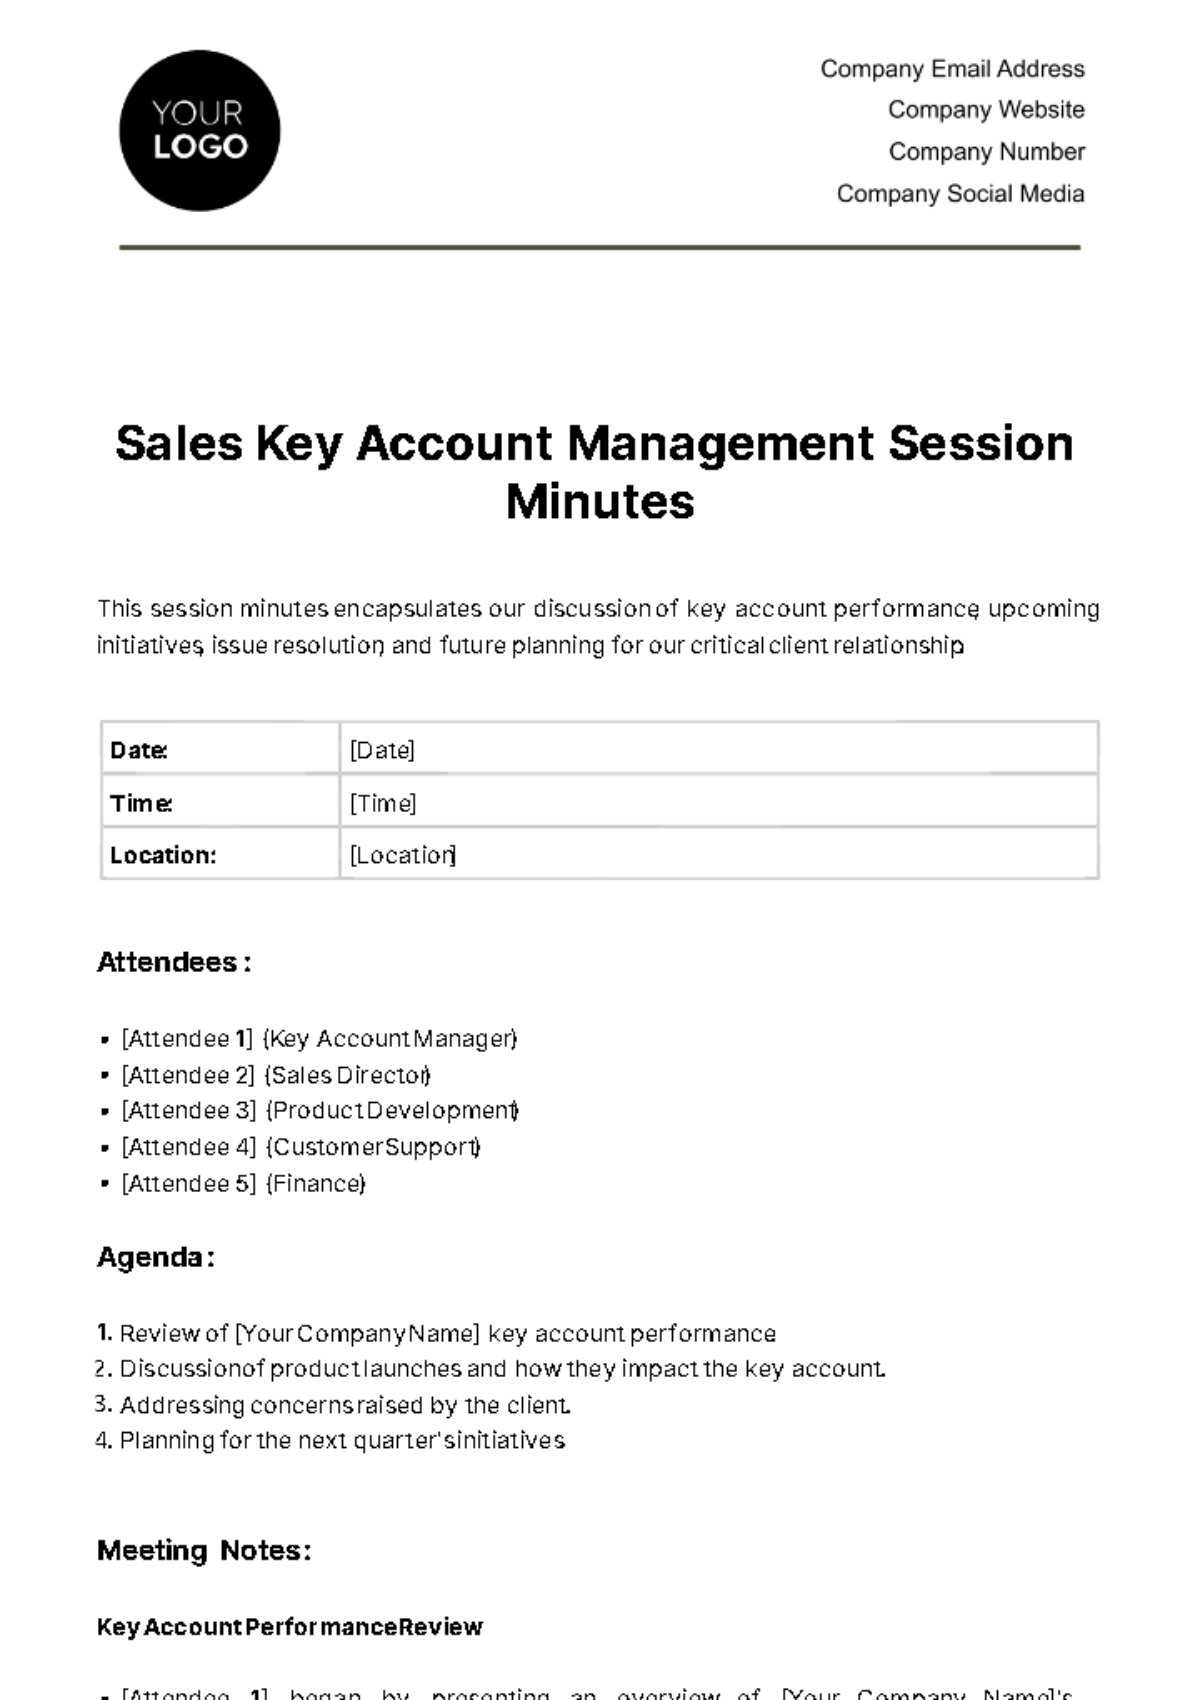 Free Sales Key Account Management Session Minute Template